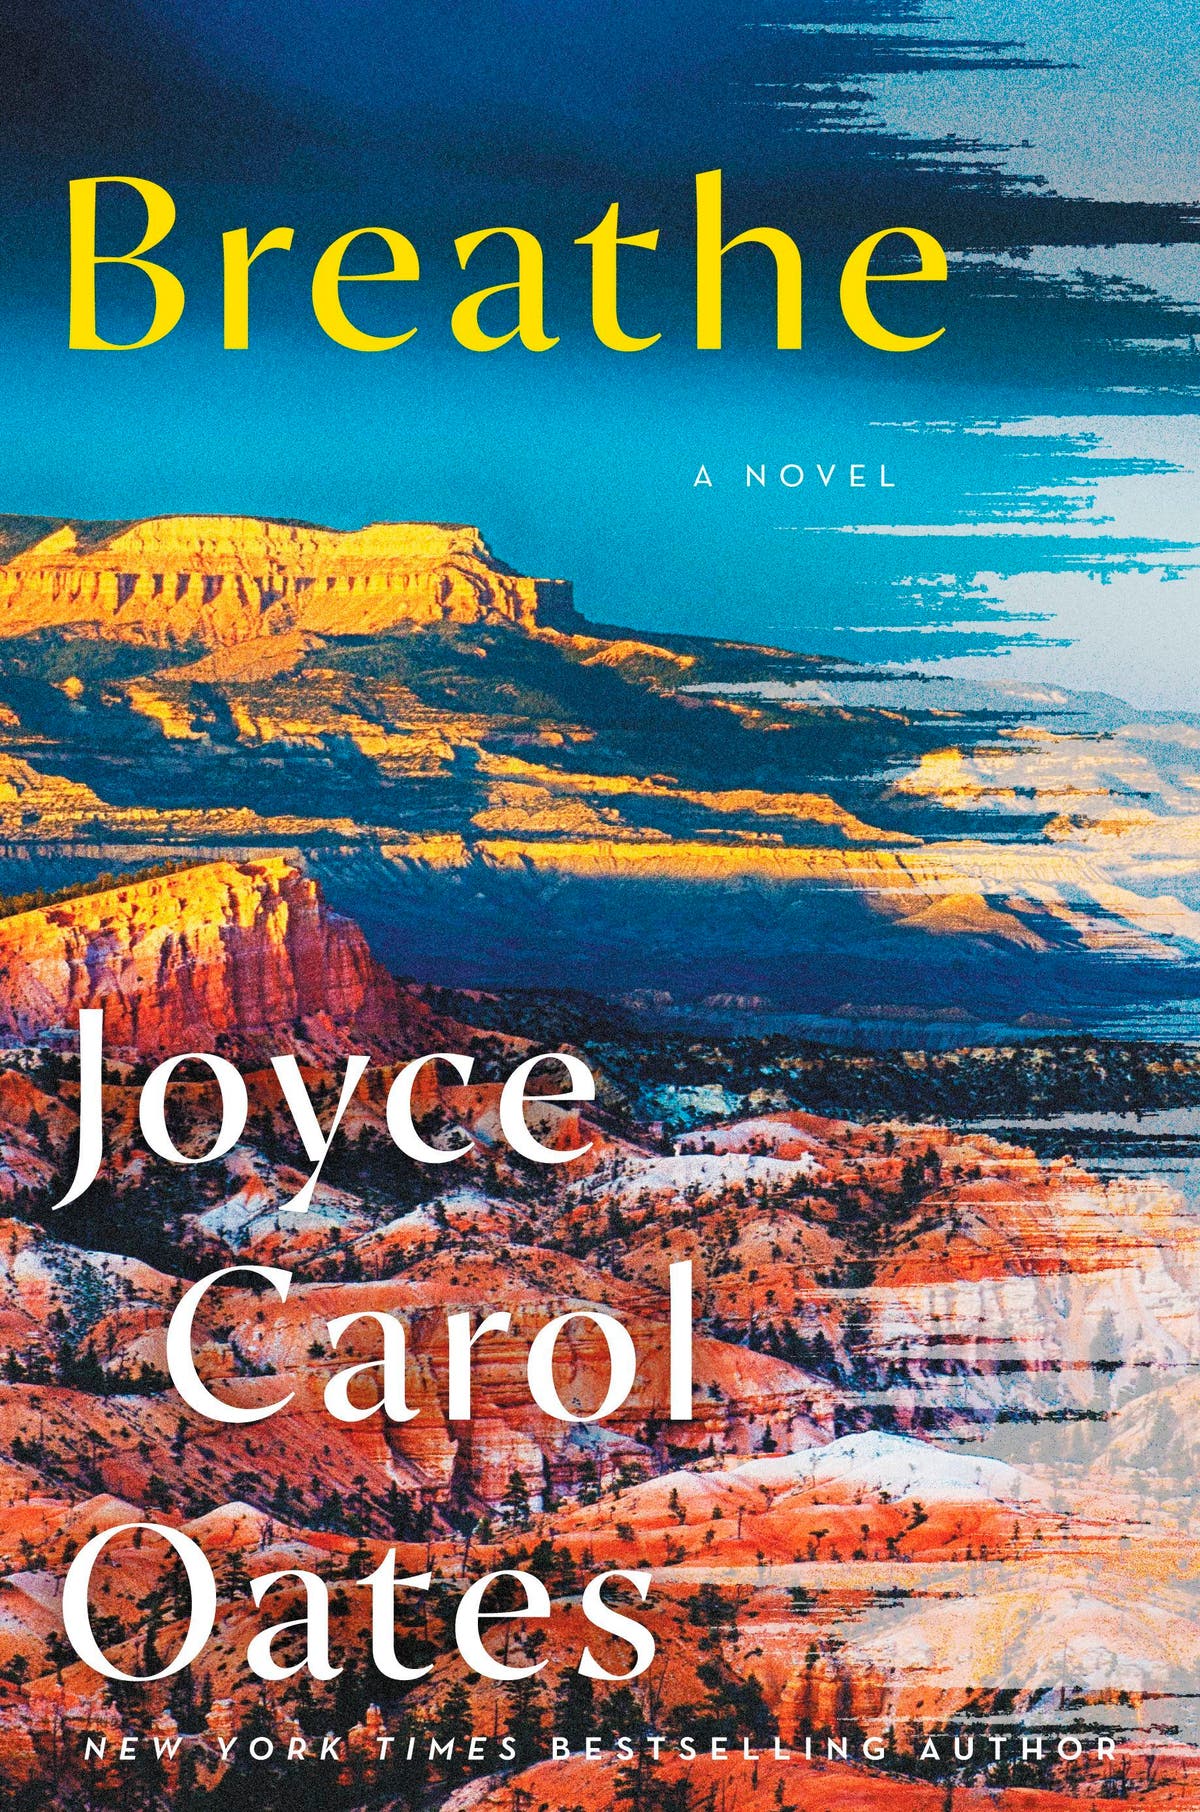 Review: Love and loss in 'Breathe' by Joyce Carol Oates